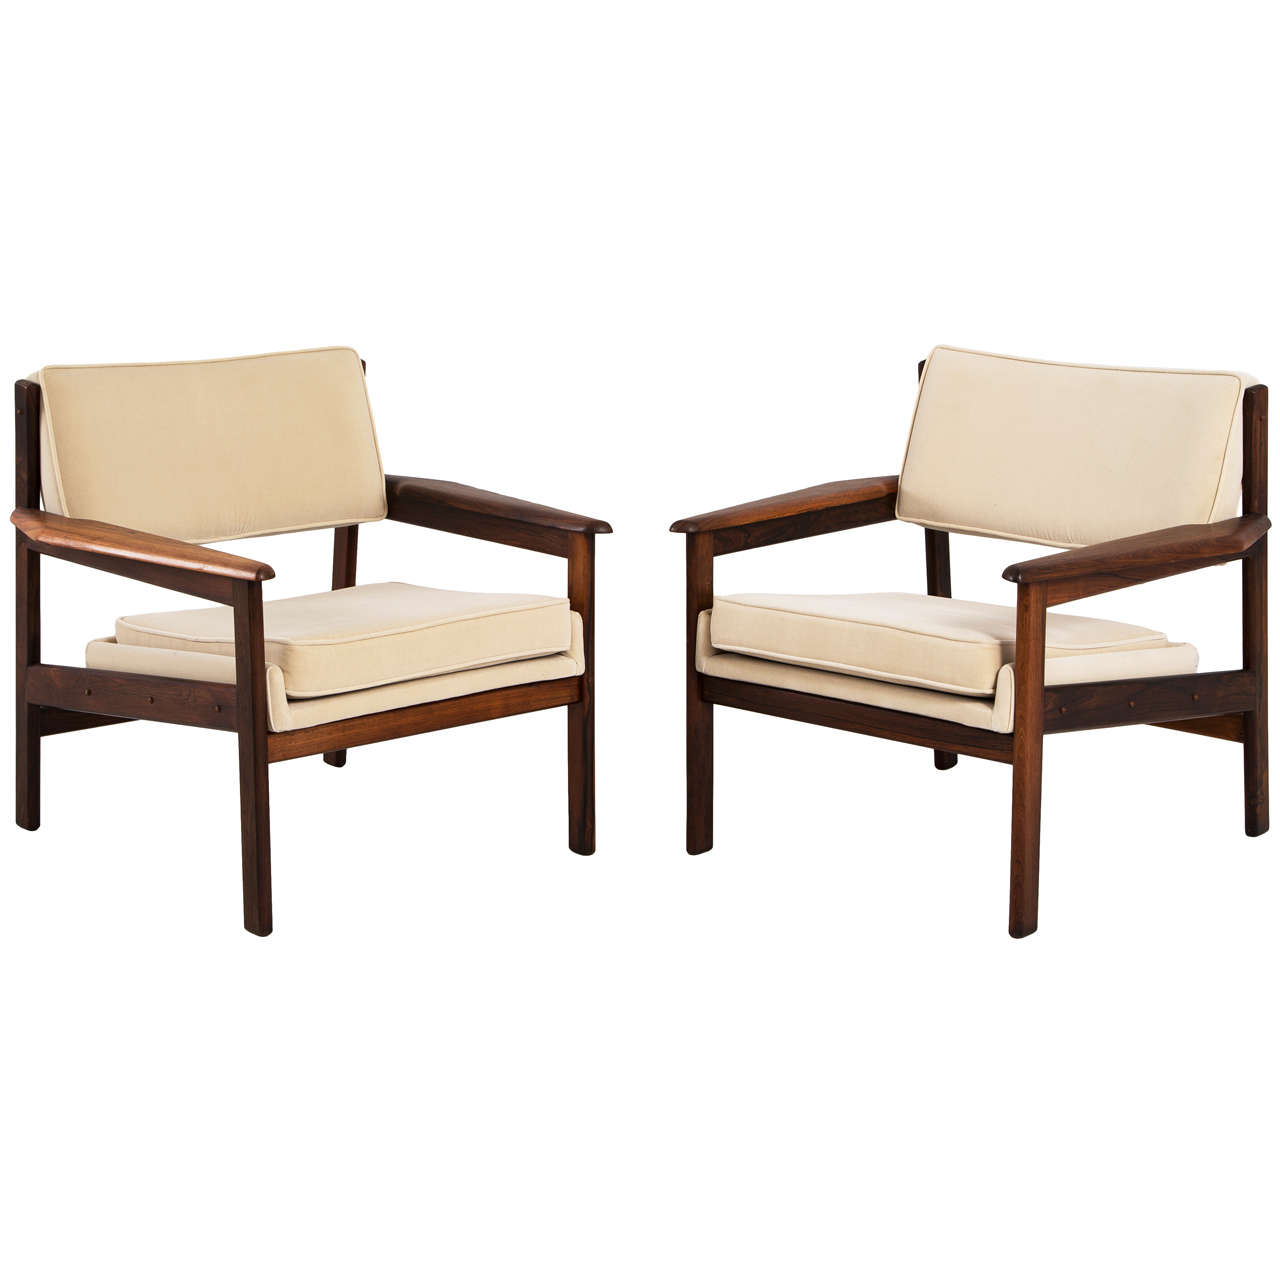 Pair of "Drummond" Lounge Chairs by Sergio Rodrigues for OCA, 1959